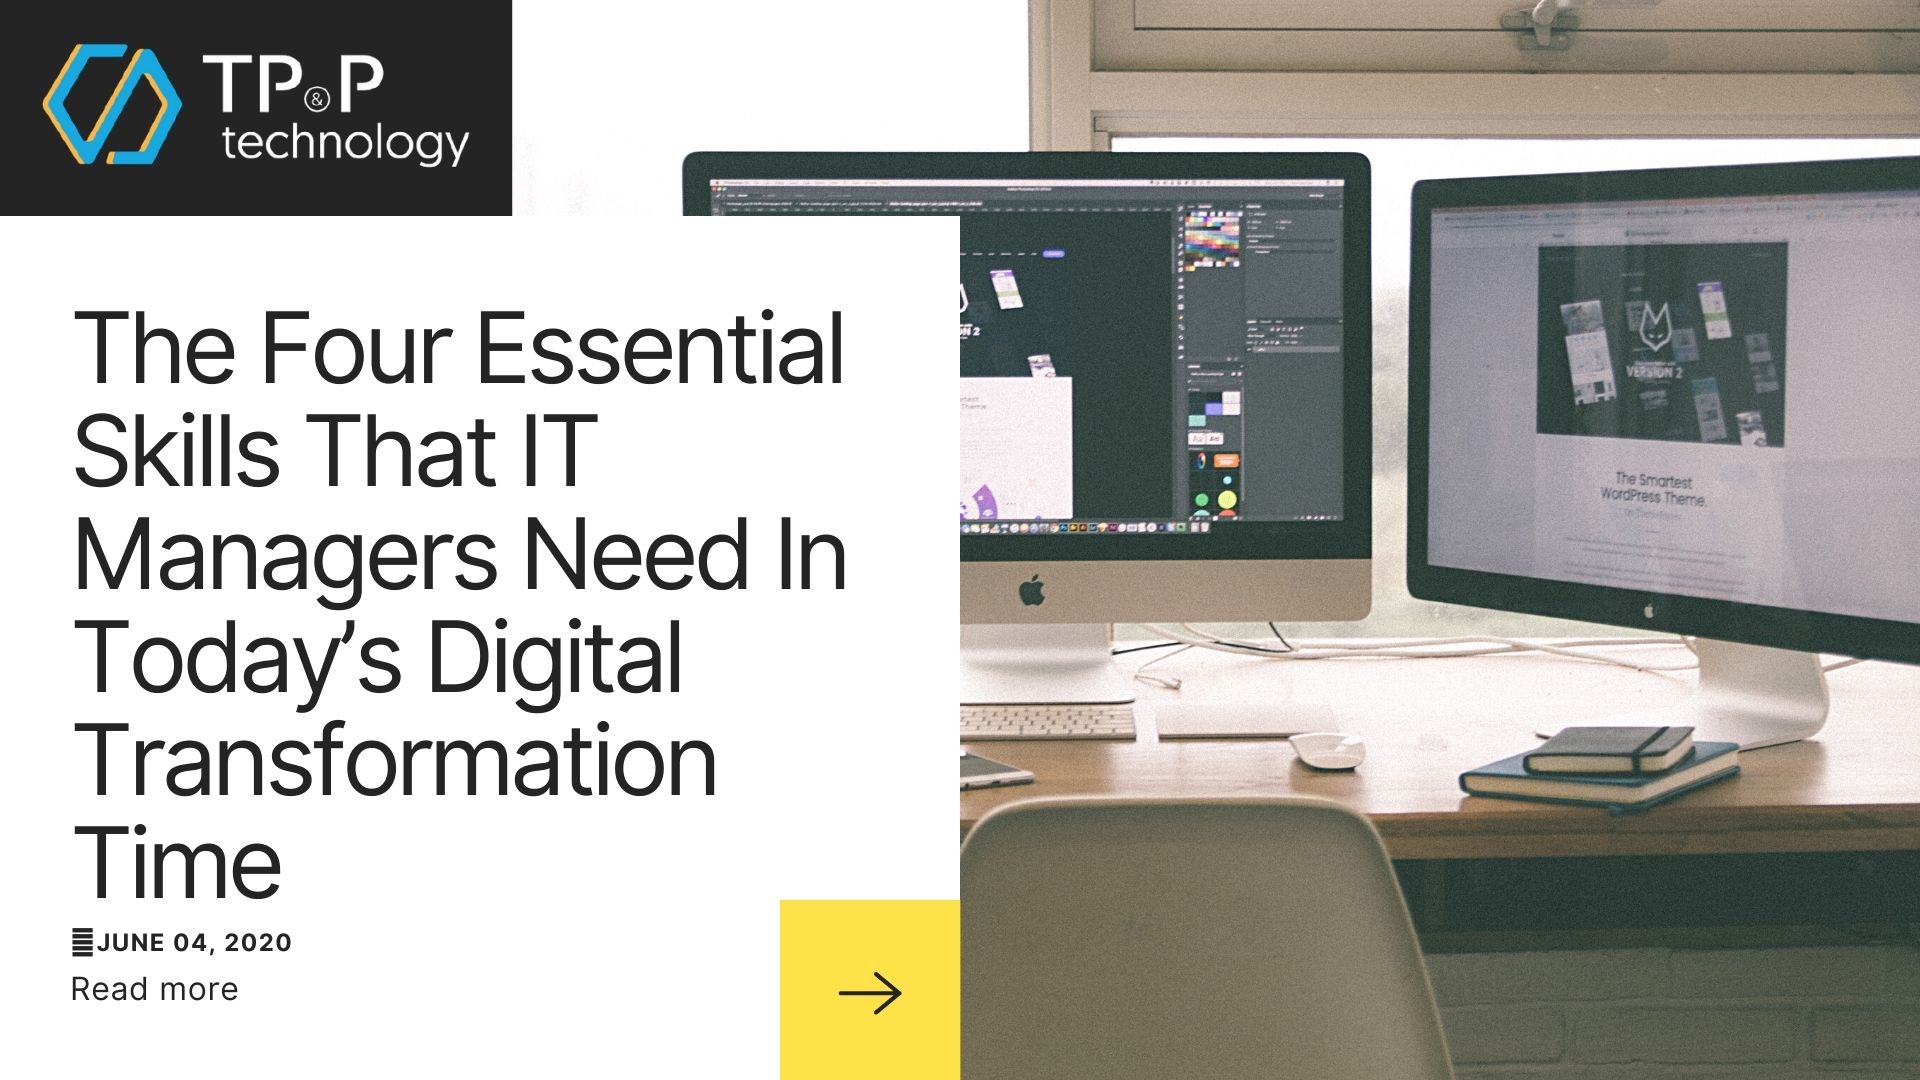 The Four Essential Skills That IT Managers Need In Today’s Digital Transformation Time